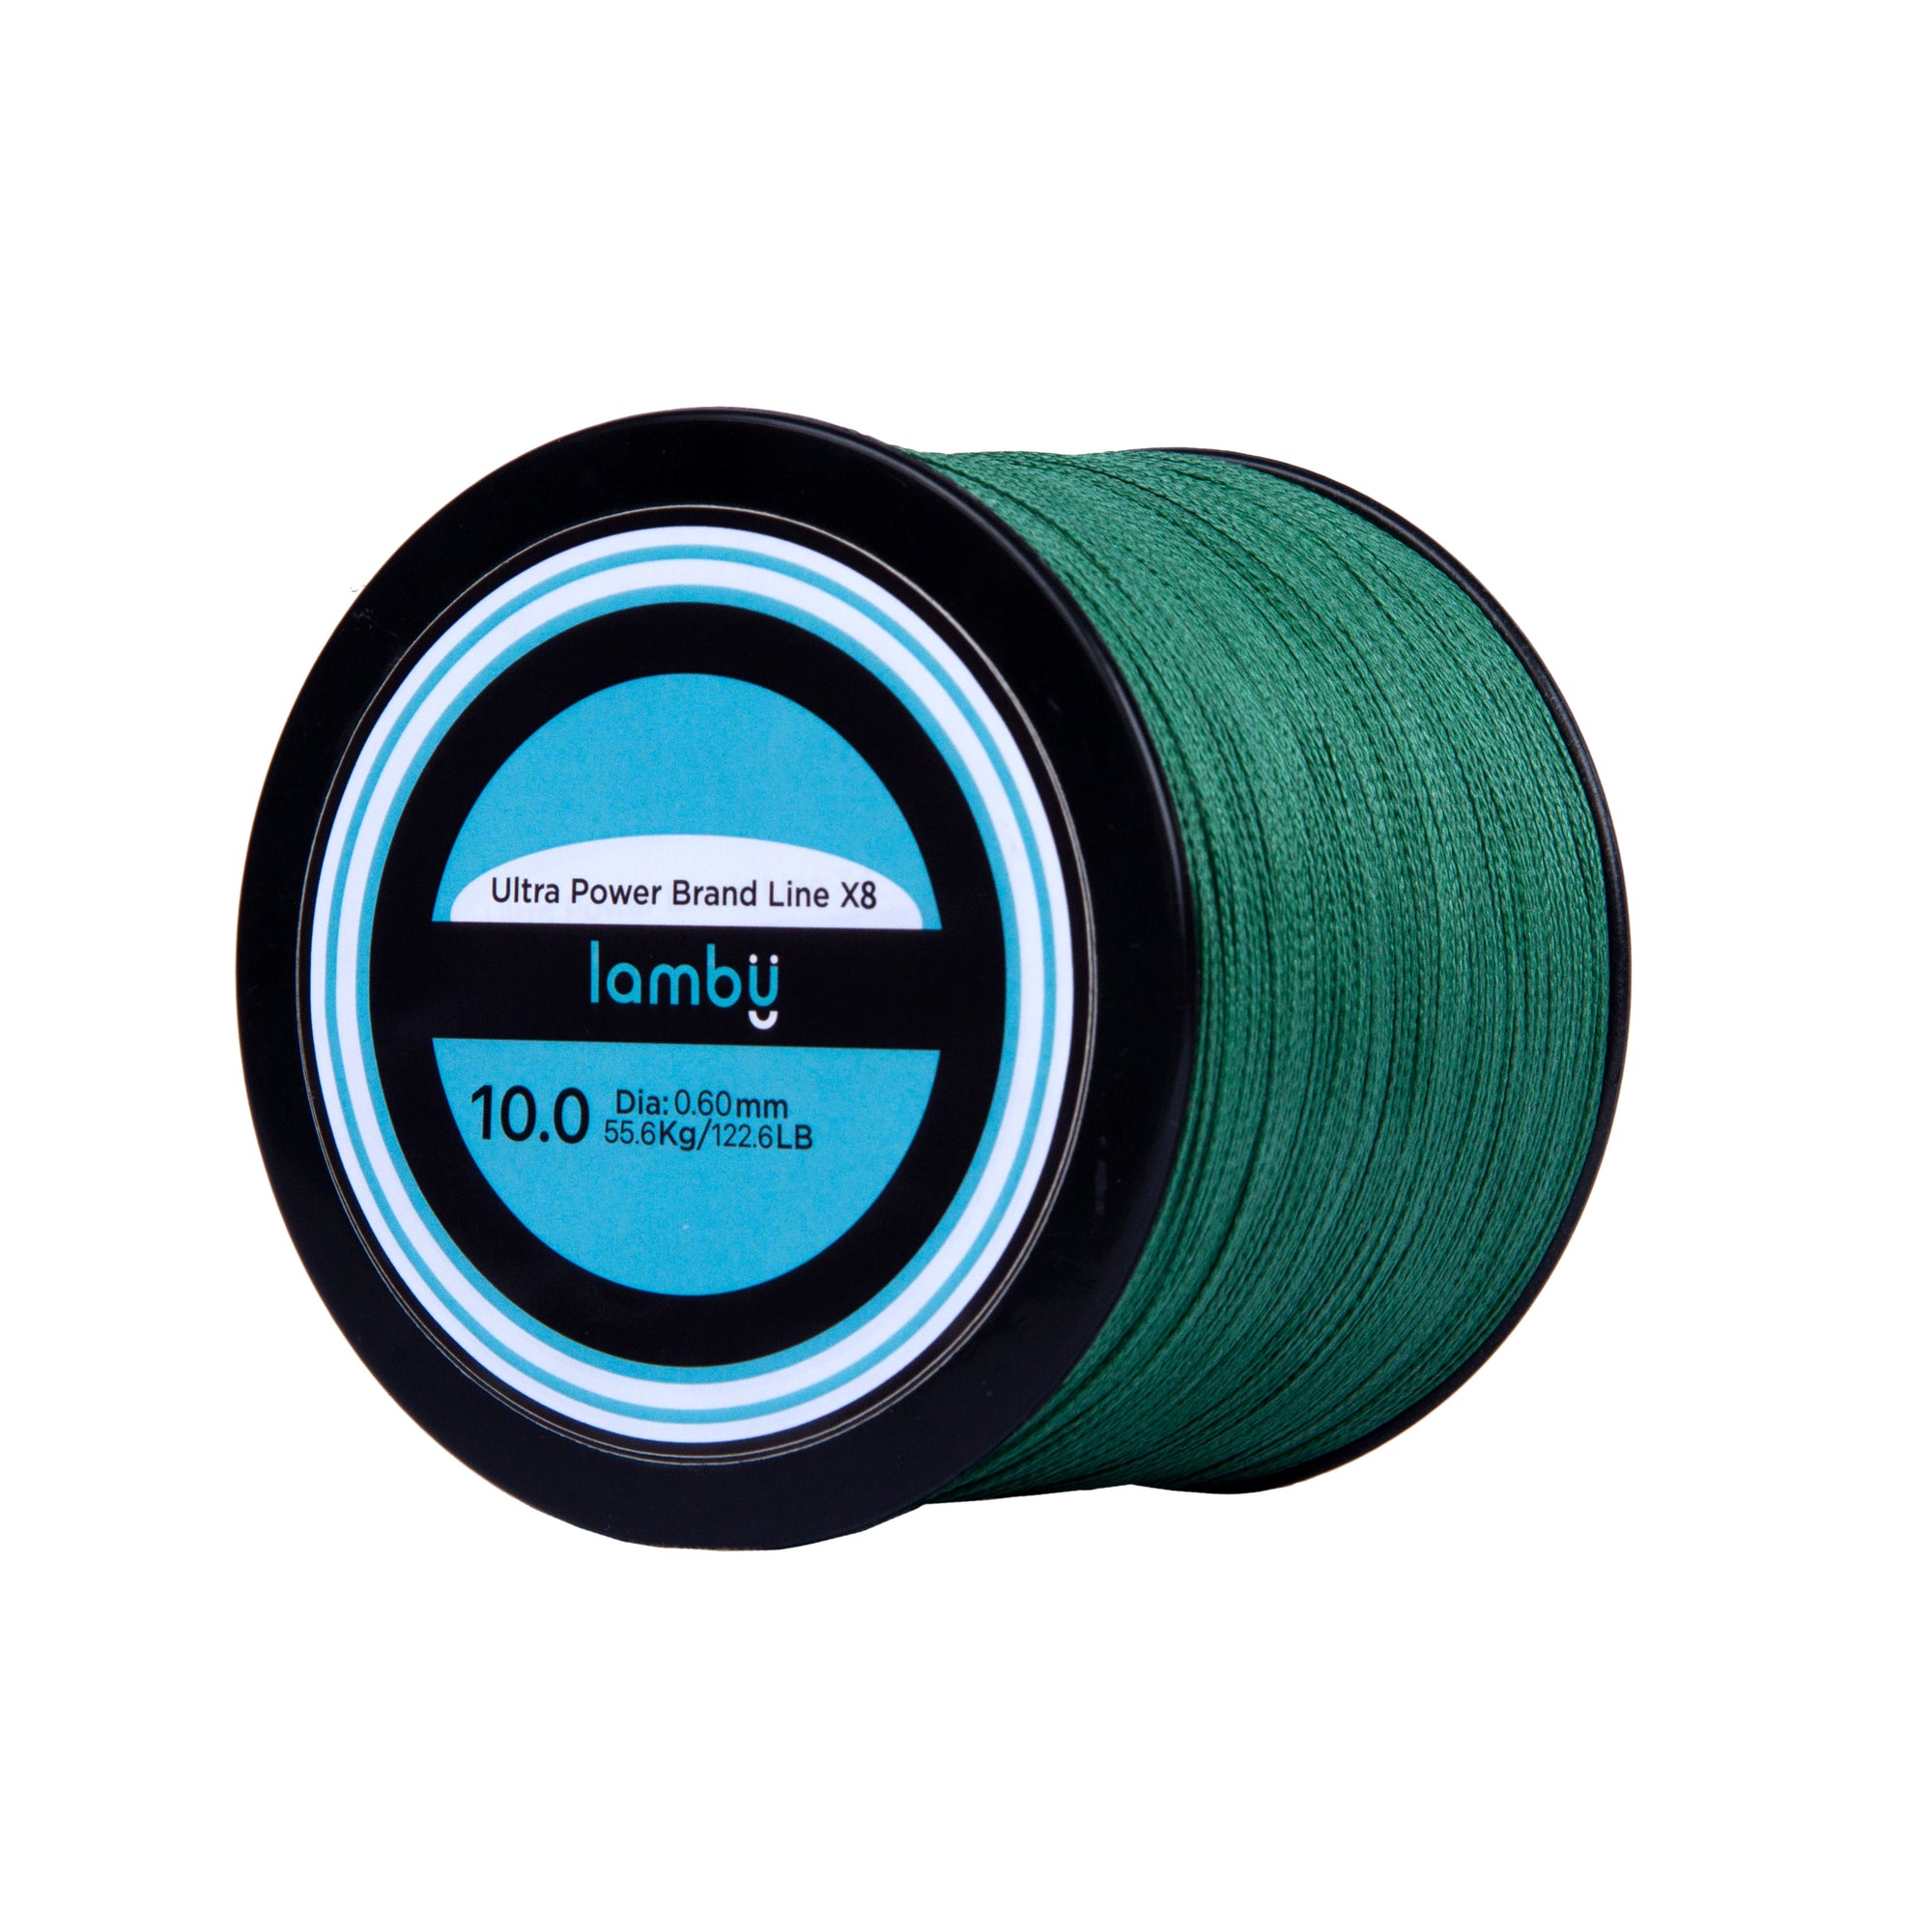 JOSBY 8 Braided Fishing Line Fishing Line 1000M Multifilament PE Cord With  Strong Japan Technology, 4 Strands, 10LB/85LB, Orange 230822 From Ren06,  $11